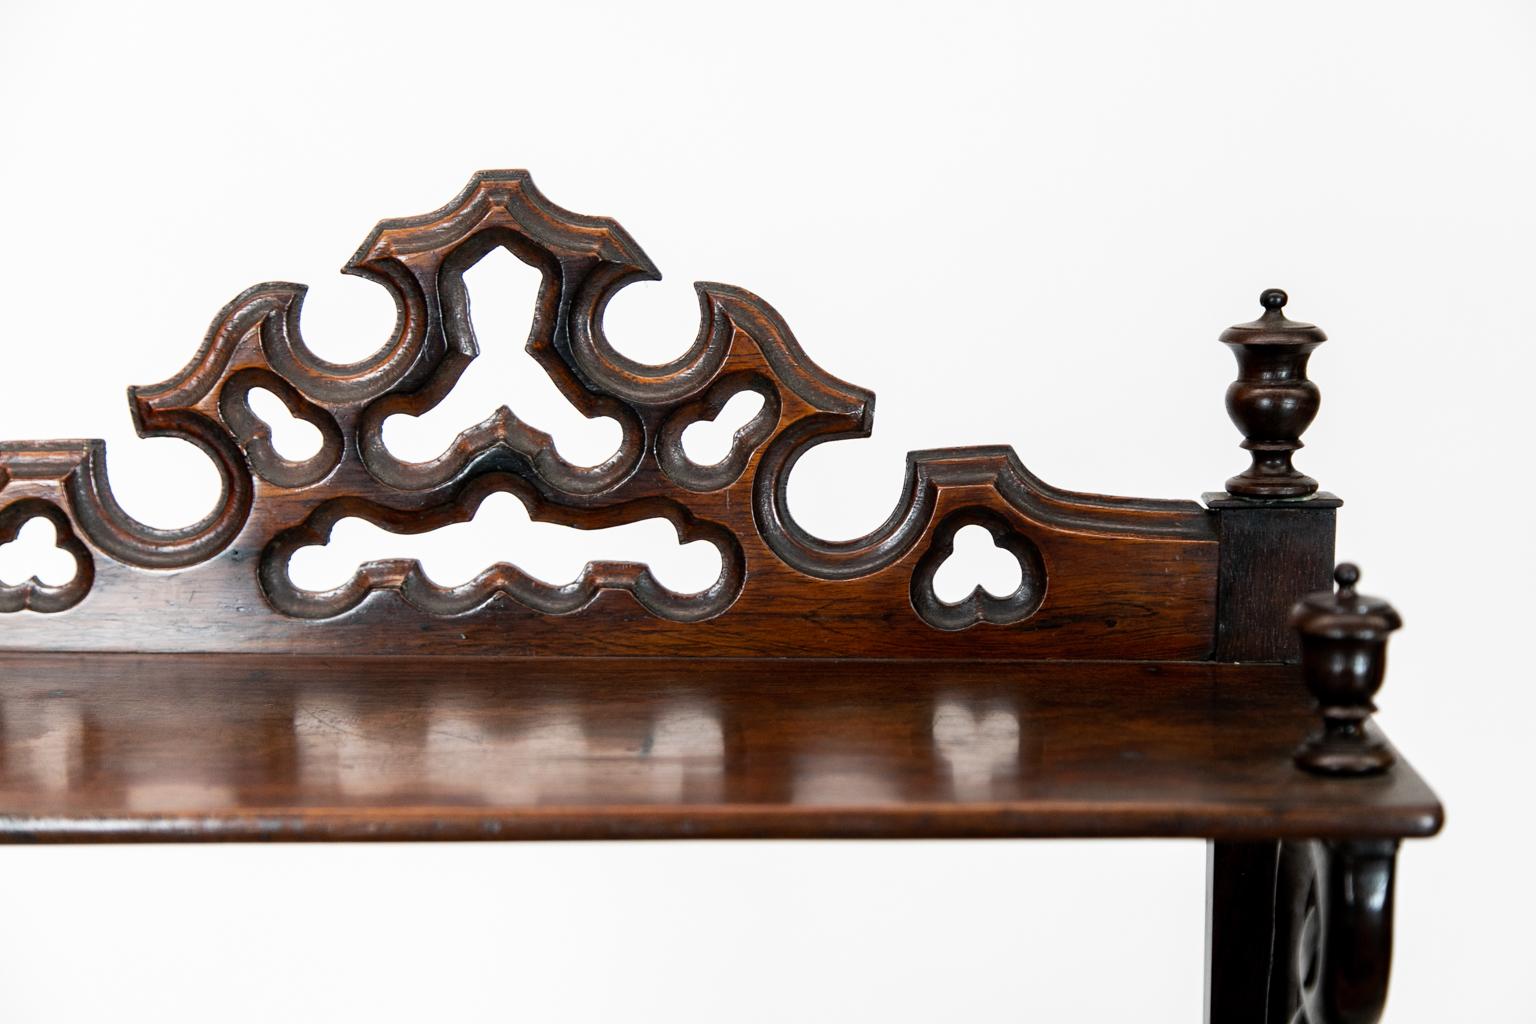 English rosewood four-tier display shelf with shaped and carved galleries on three levels. The bottom section has three divisions and the top shelf has carved scroll supports. The bottom two shelves have turned supports and turned support panels on